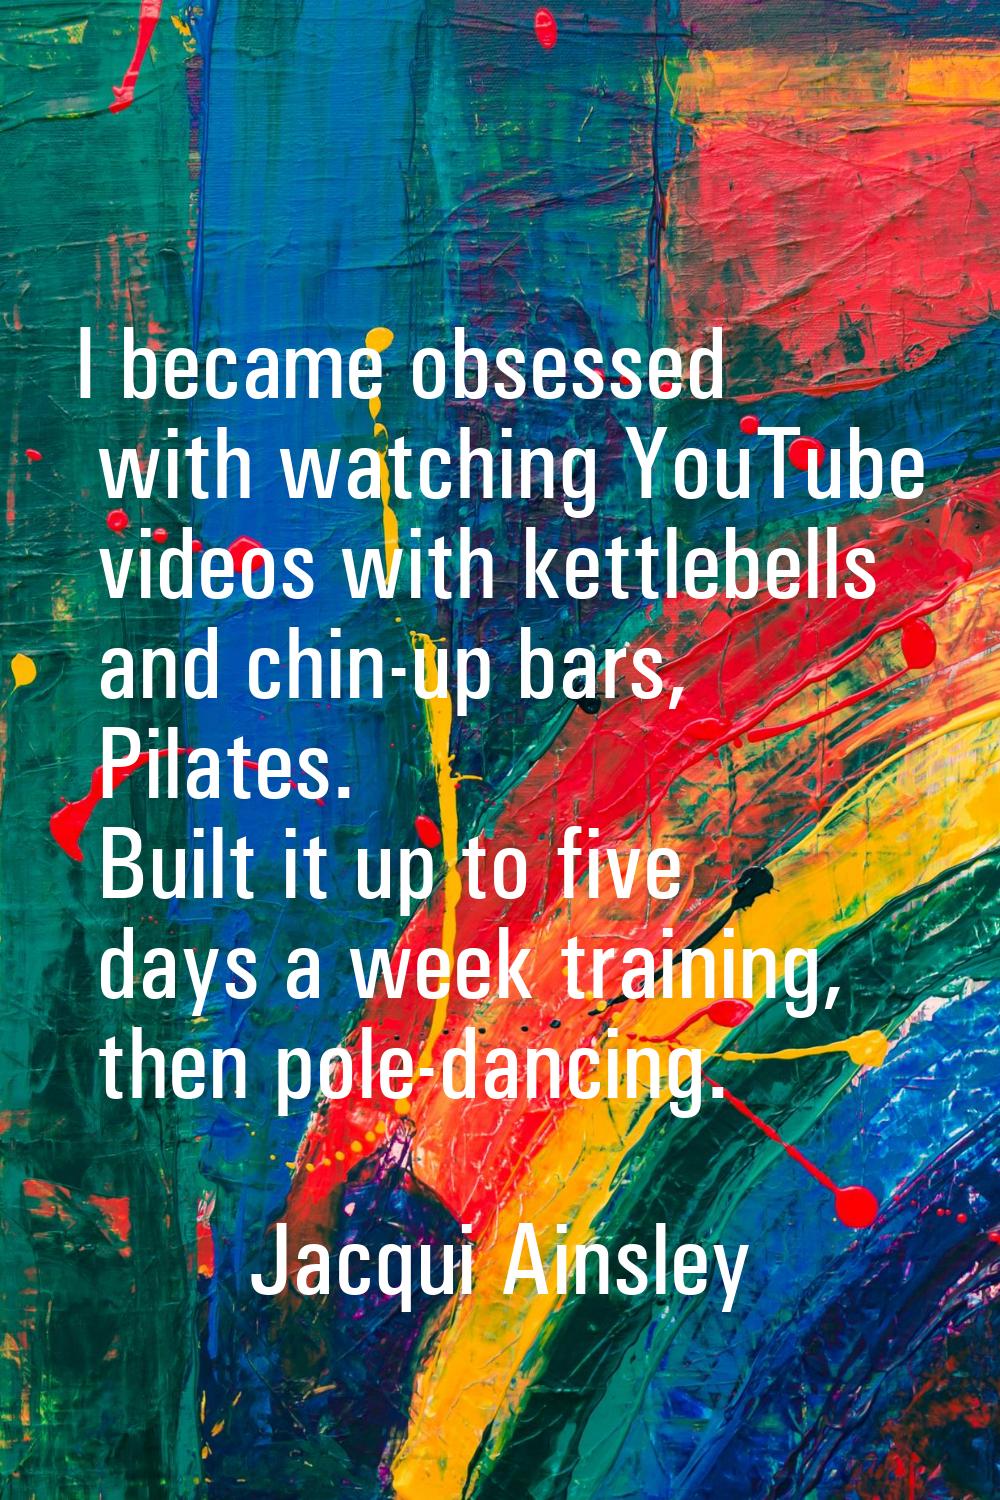 I became obsessed with watching YouTube videos with kettlebells and chin-up bars, Pilates. Built it